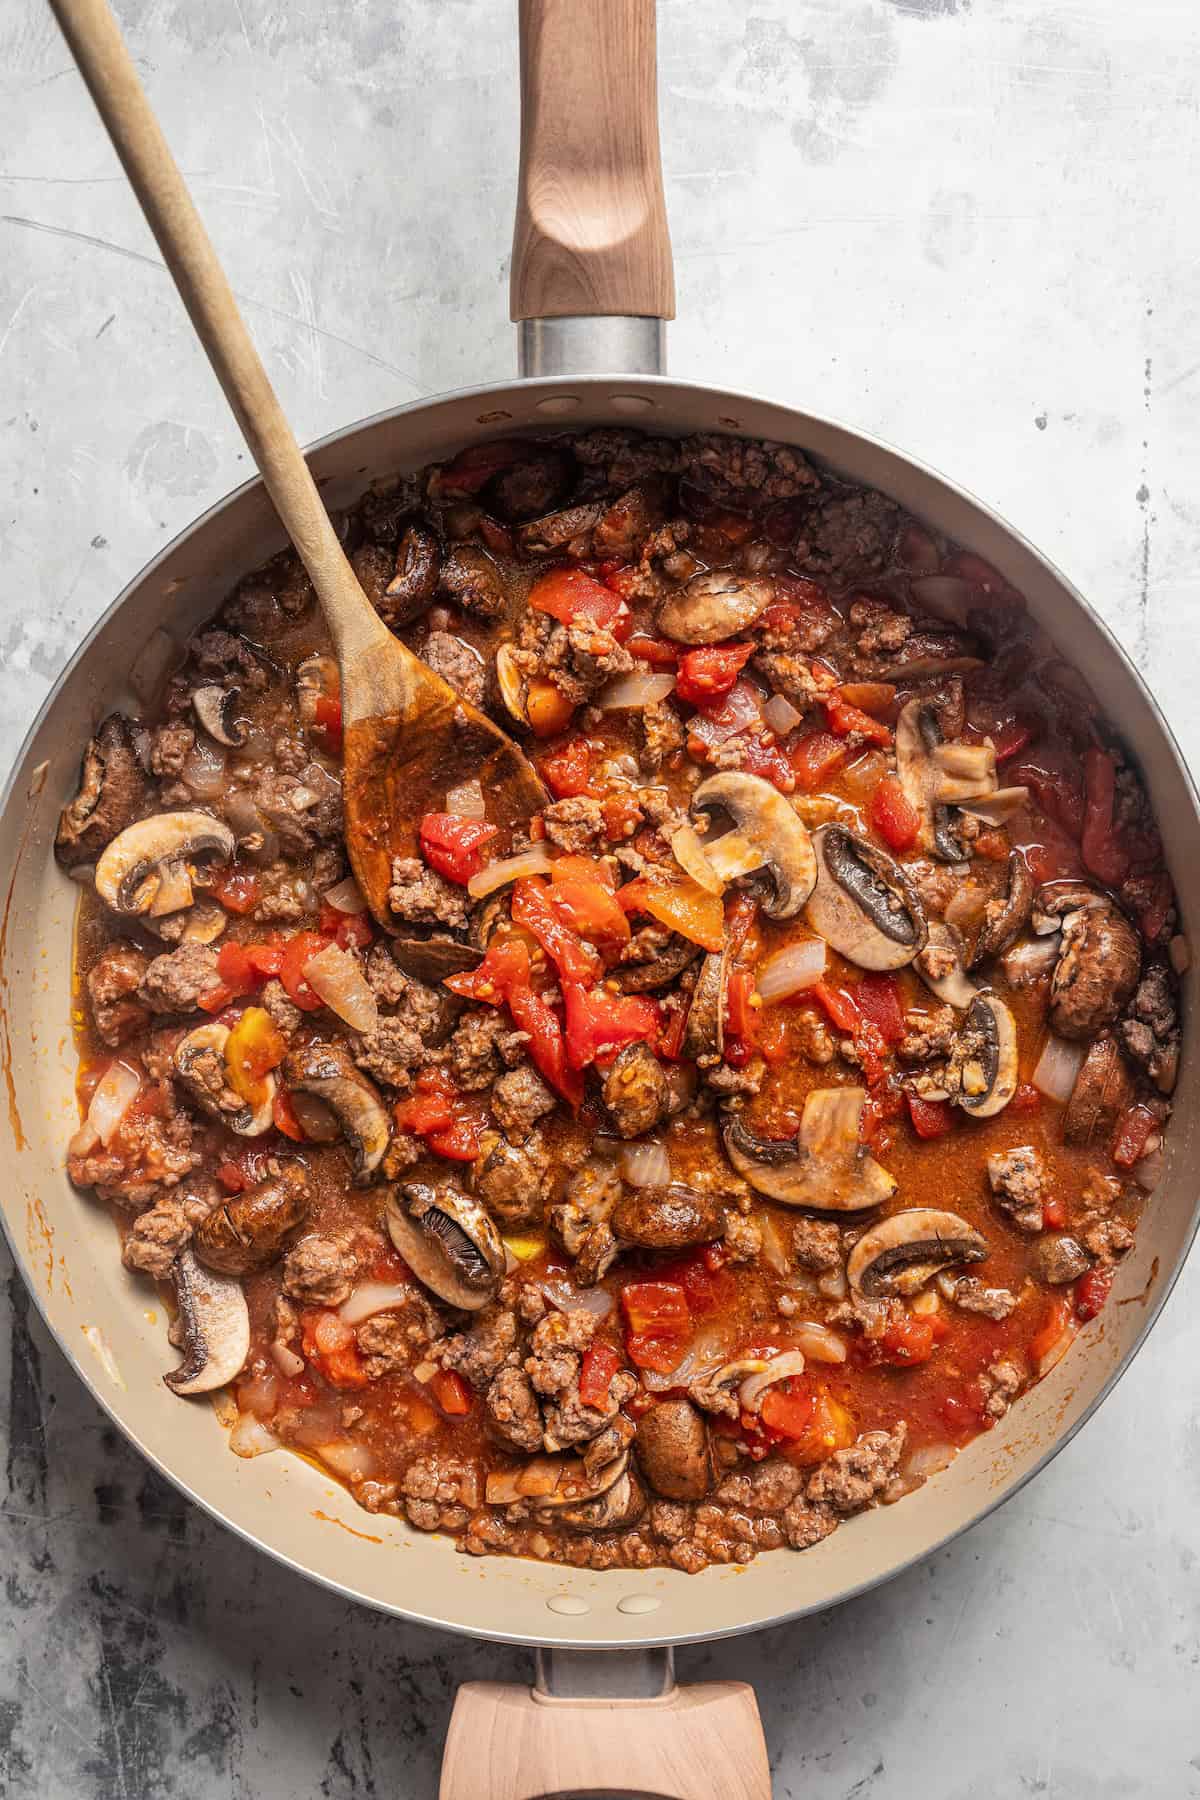 Ground beef and mushrooms with tomato sauce in a skillet.